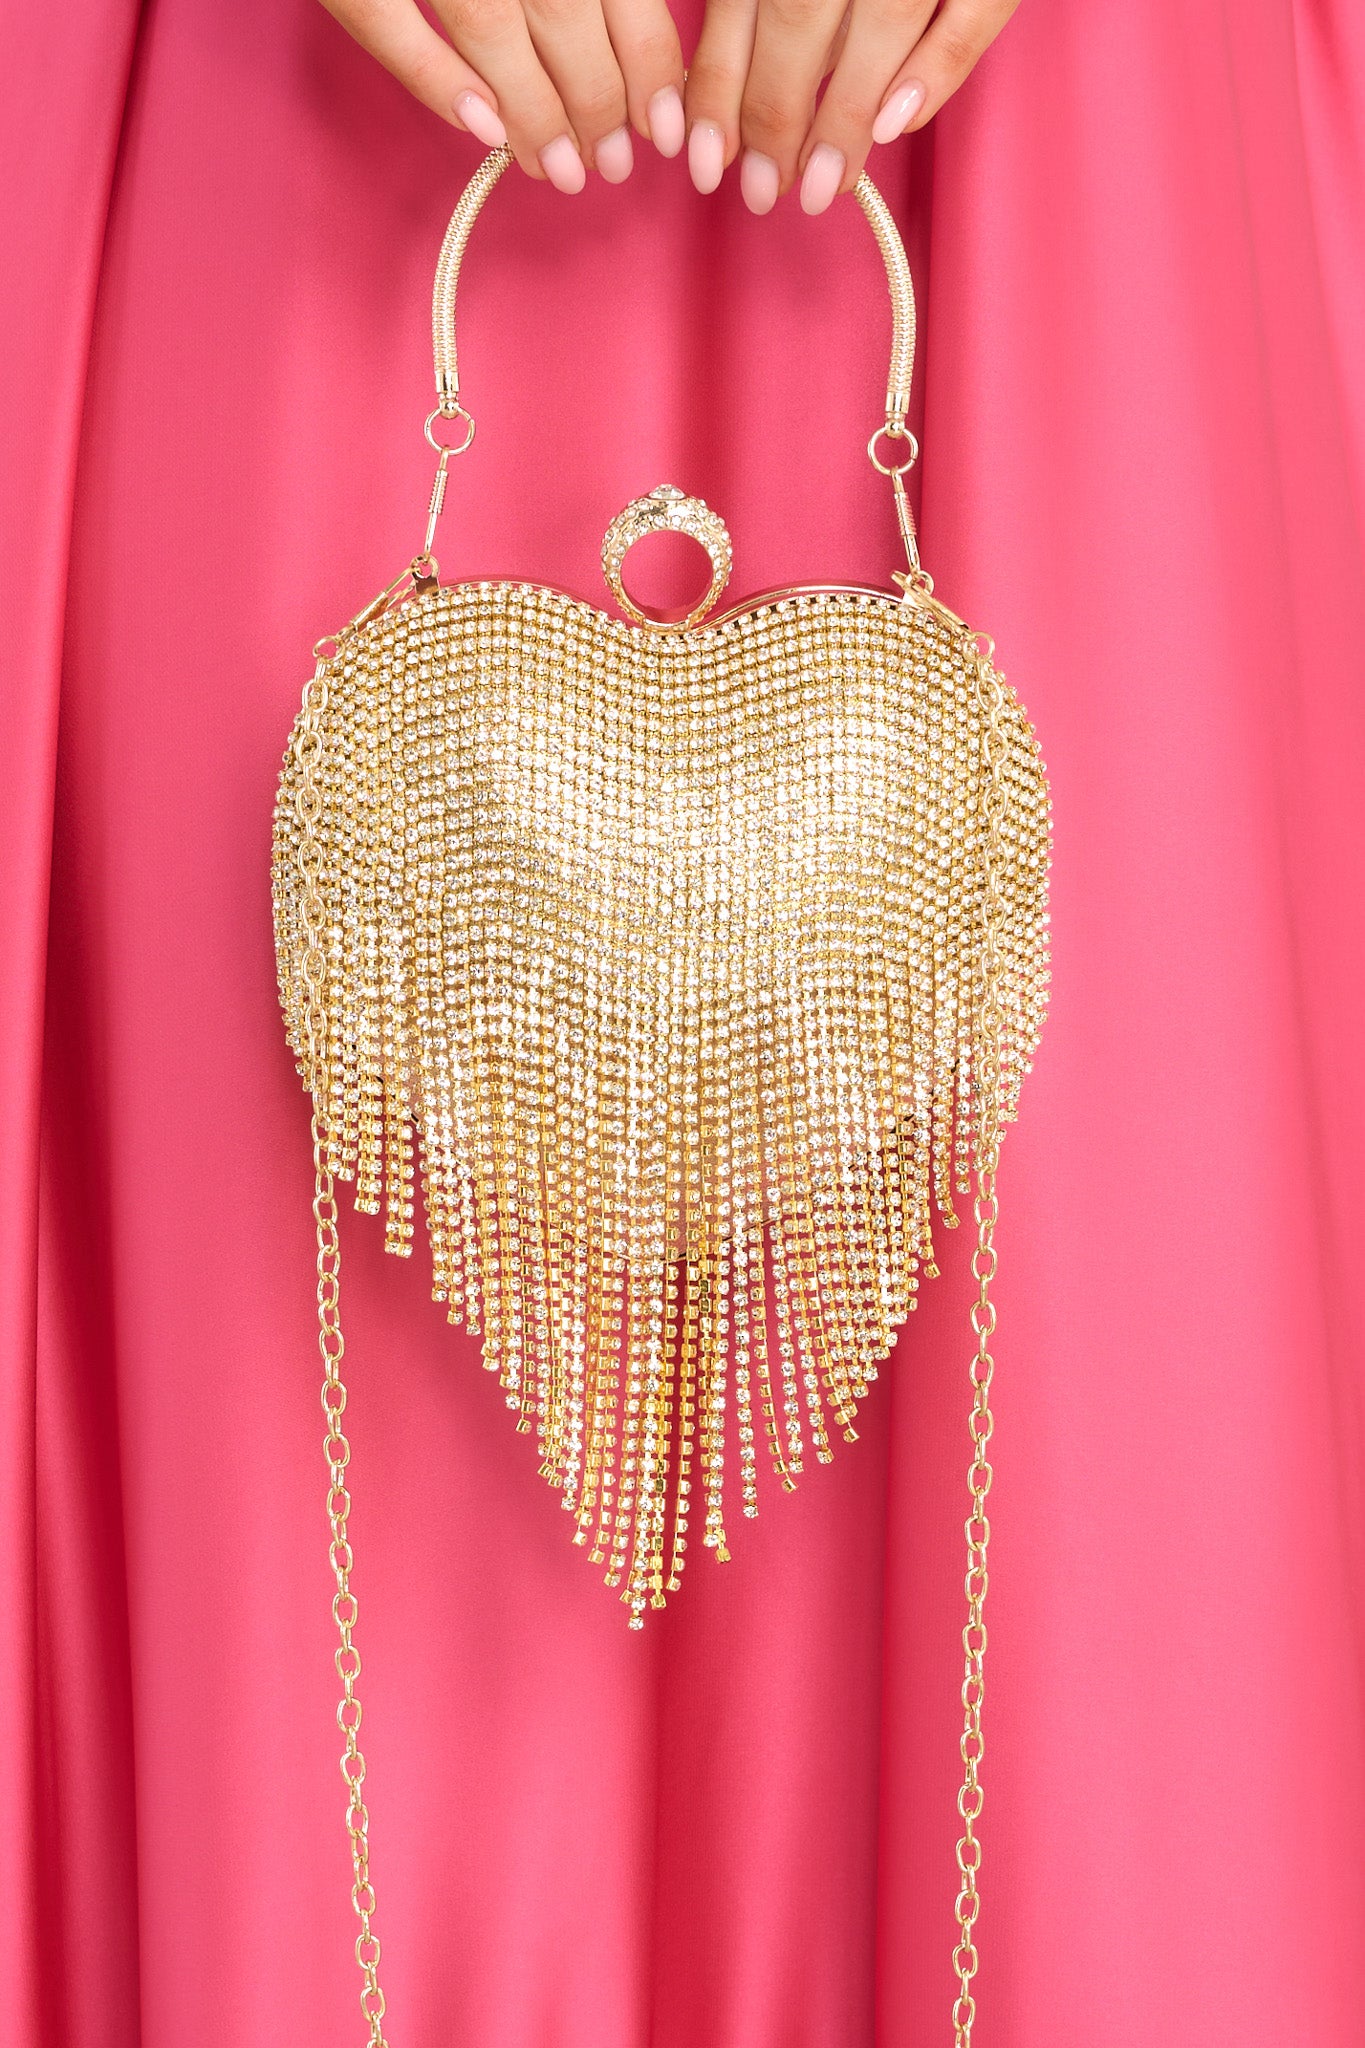 This gold handbag features gold hardware, rhinestone fringe, a removable chain strap, a ring like feature, and a snap closure.